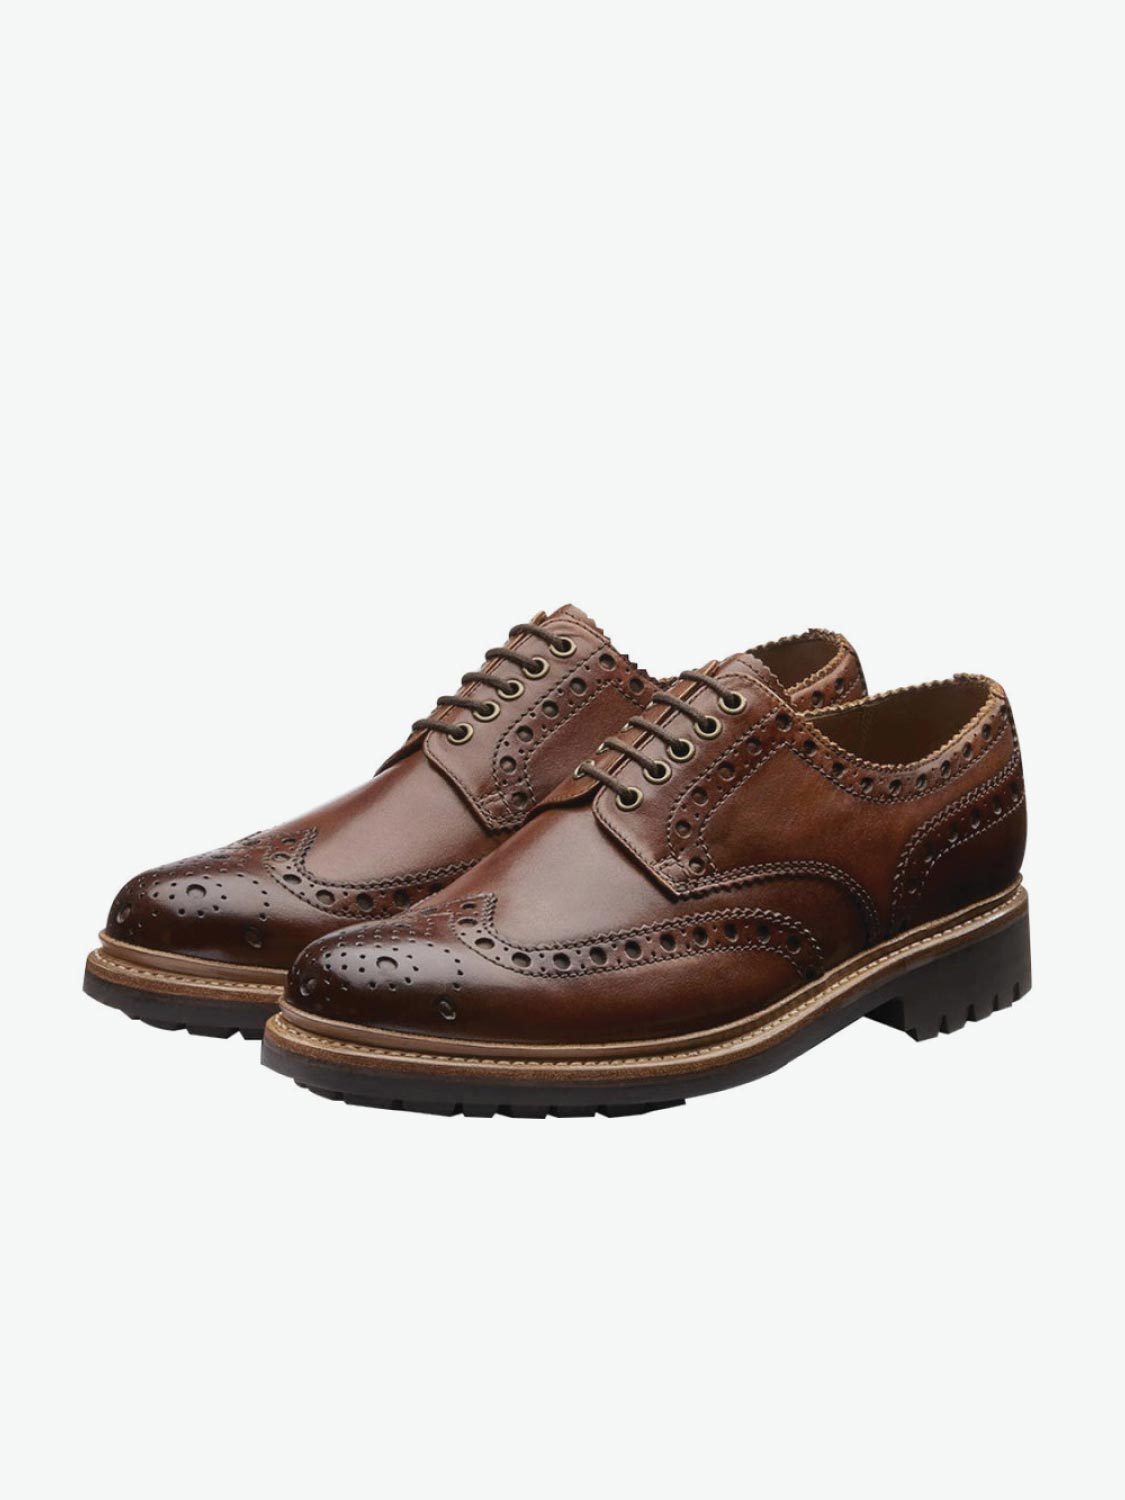 Grenson Archie Tan Brogue Leather Shoes